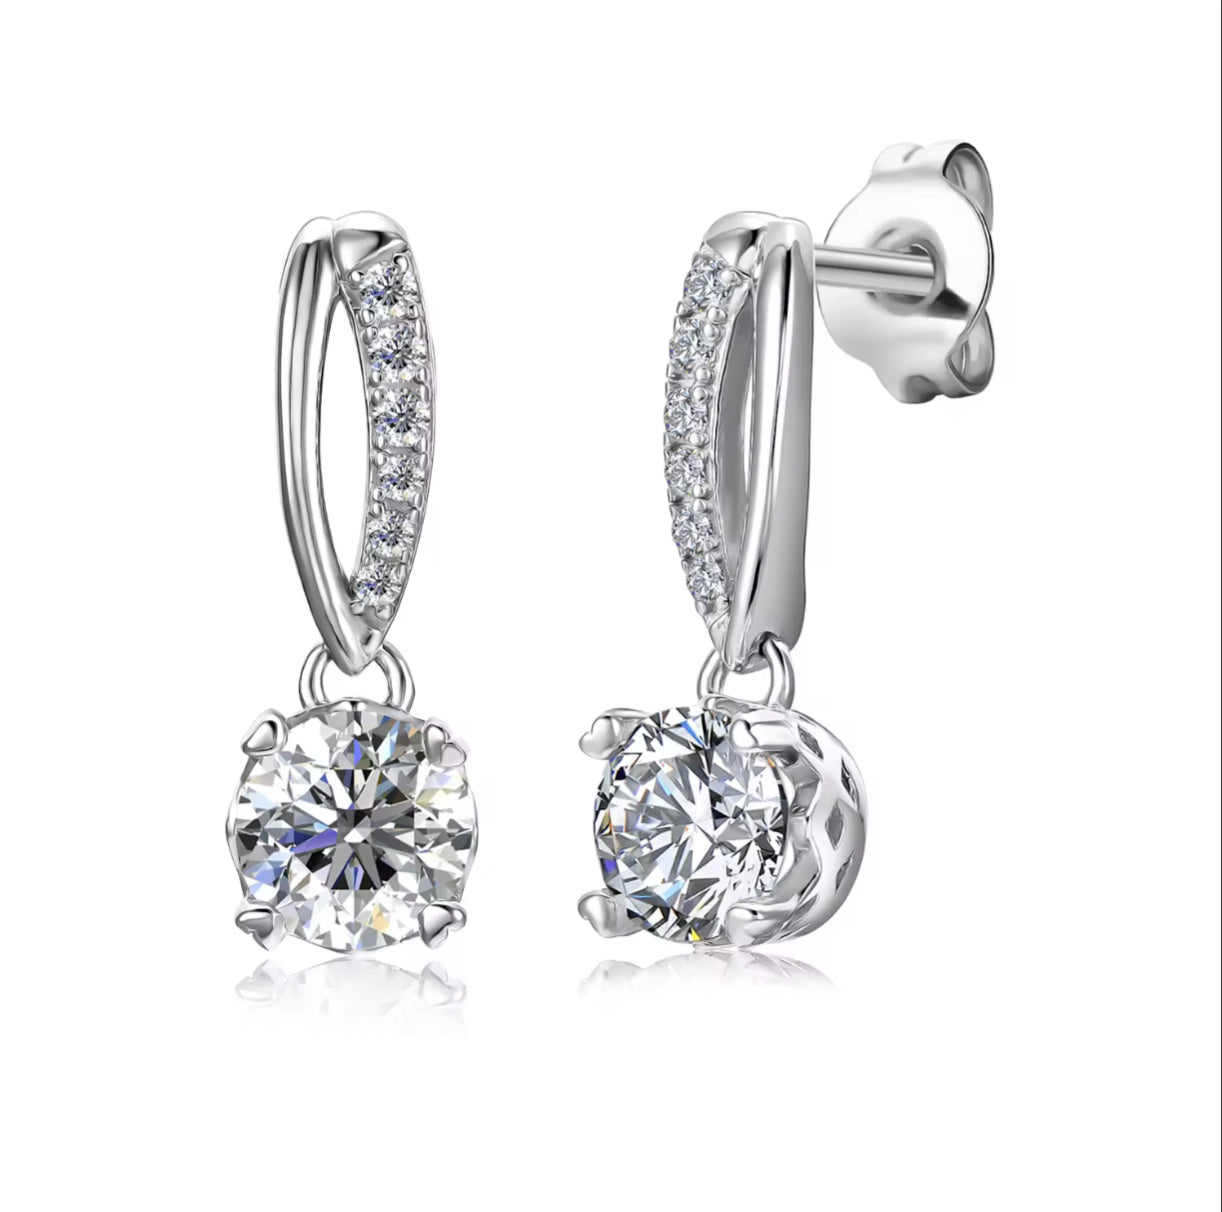 Moissanite earrings in a variety of colors